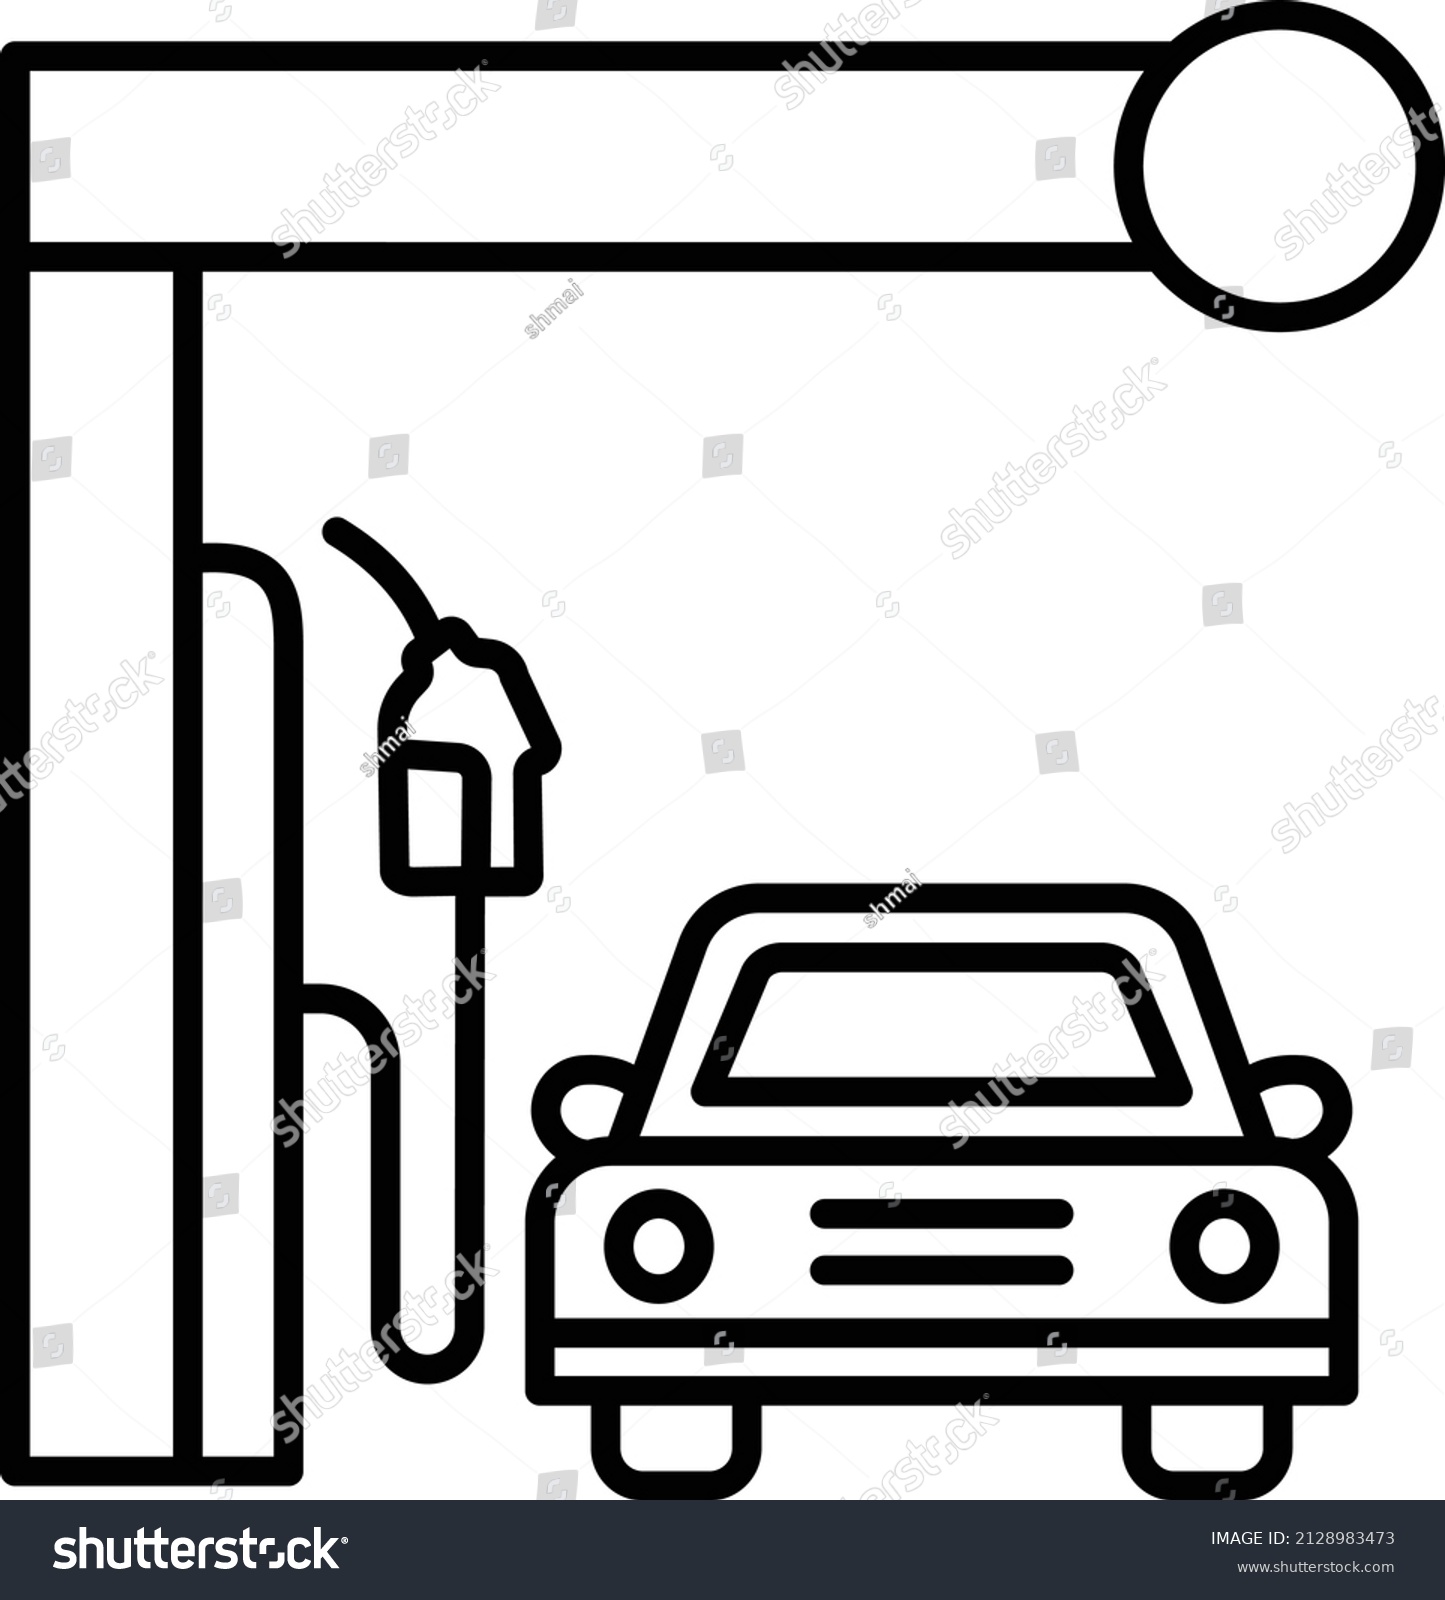 SVG of Benzine pump Vector Icon Design, crude oil and natural Liquid Gas Symbol, Petroleum and gasoline Sign, power and energy market stock illustration, petrol bowser with vehicle Front View Concept, svg